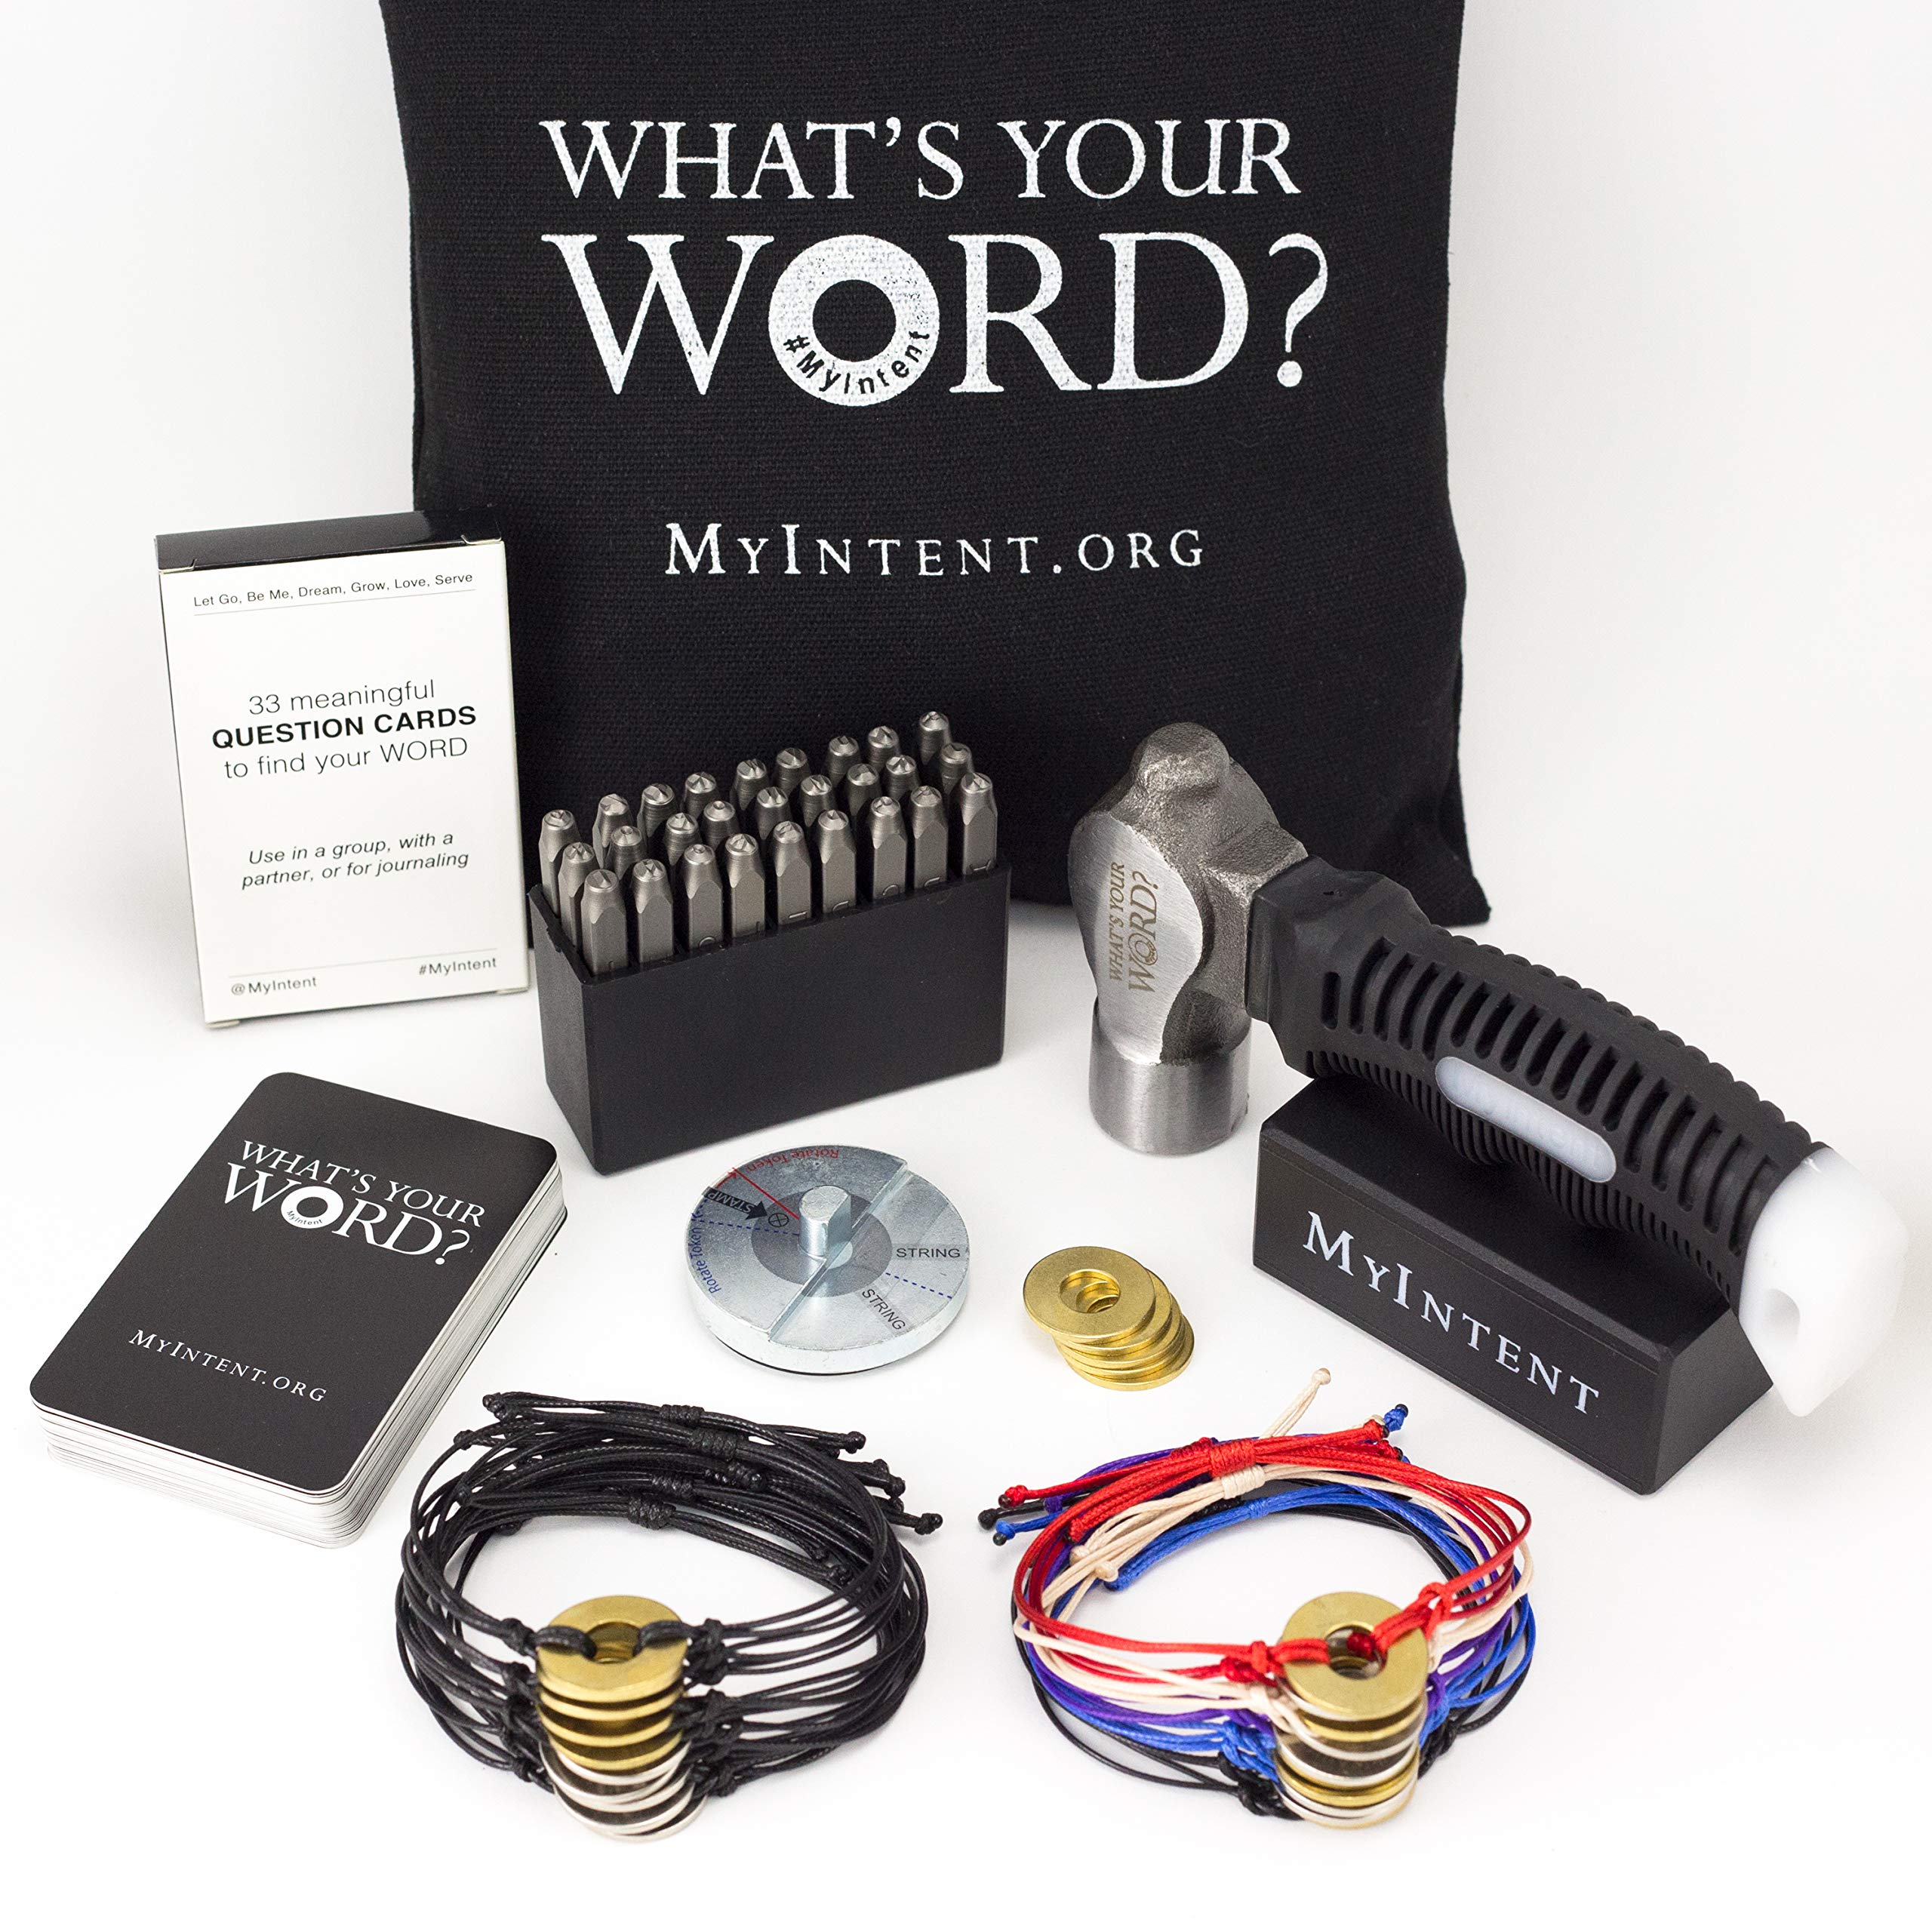 MyIntent Classic 20 Mix Maker Kit: Jewelry Making Supplies, Unique Charms, What's Your Word Conversation Cards, Makes 20 Bracelets